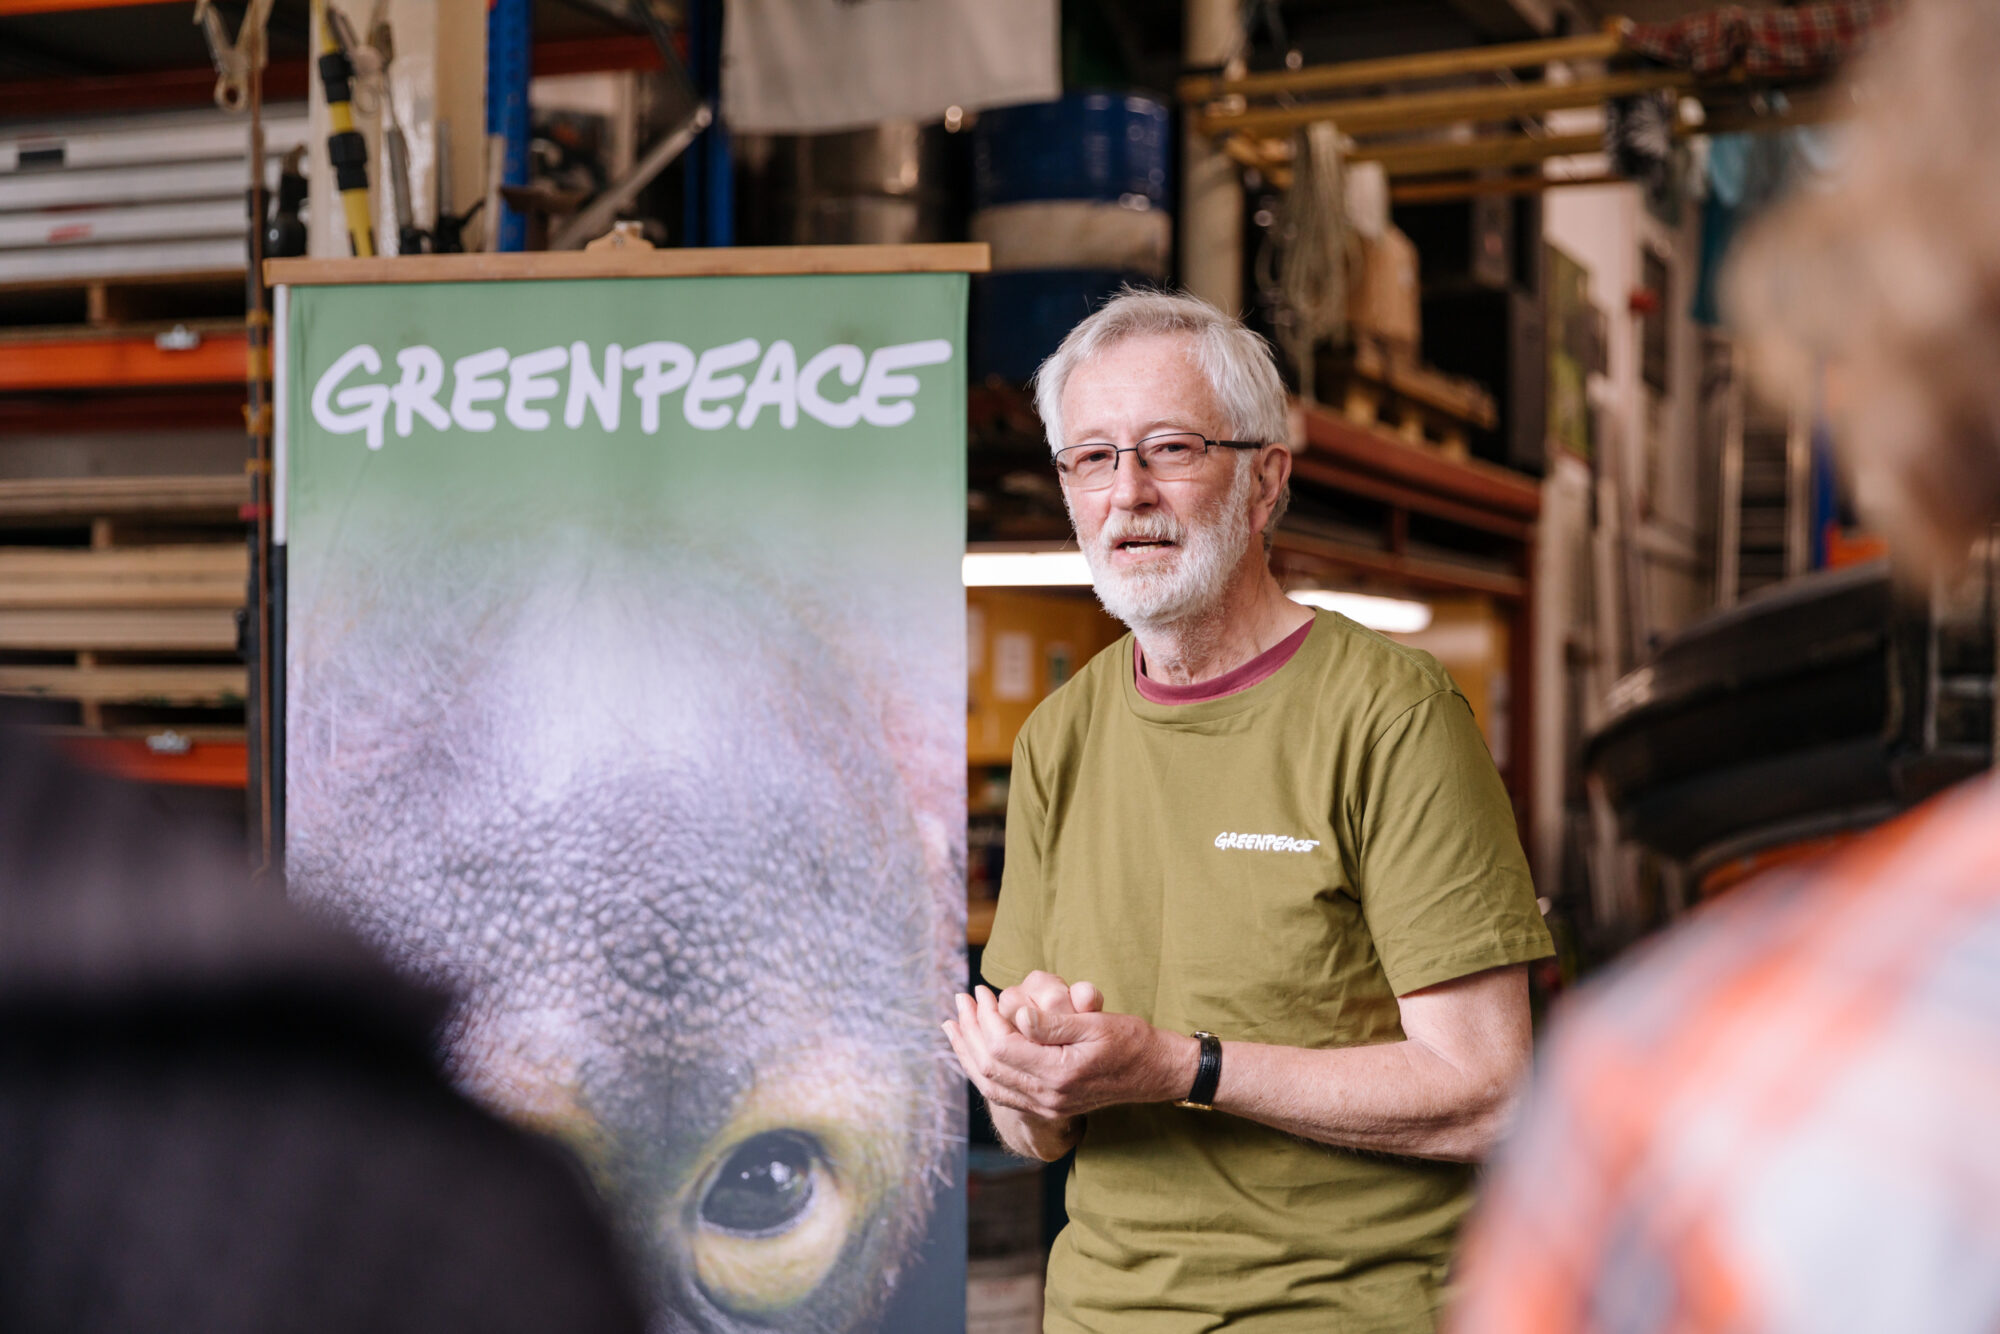 A speaker delivers a talk standing next to a Greenpeace banner